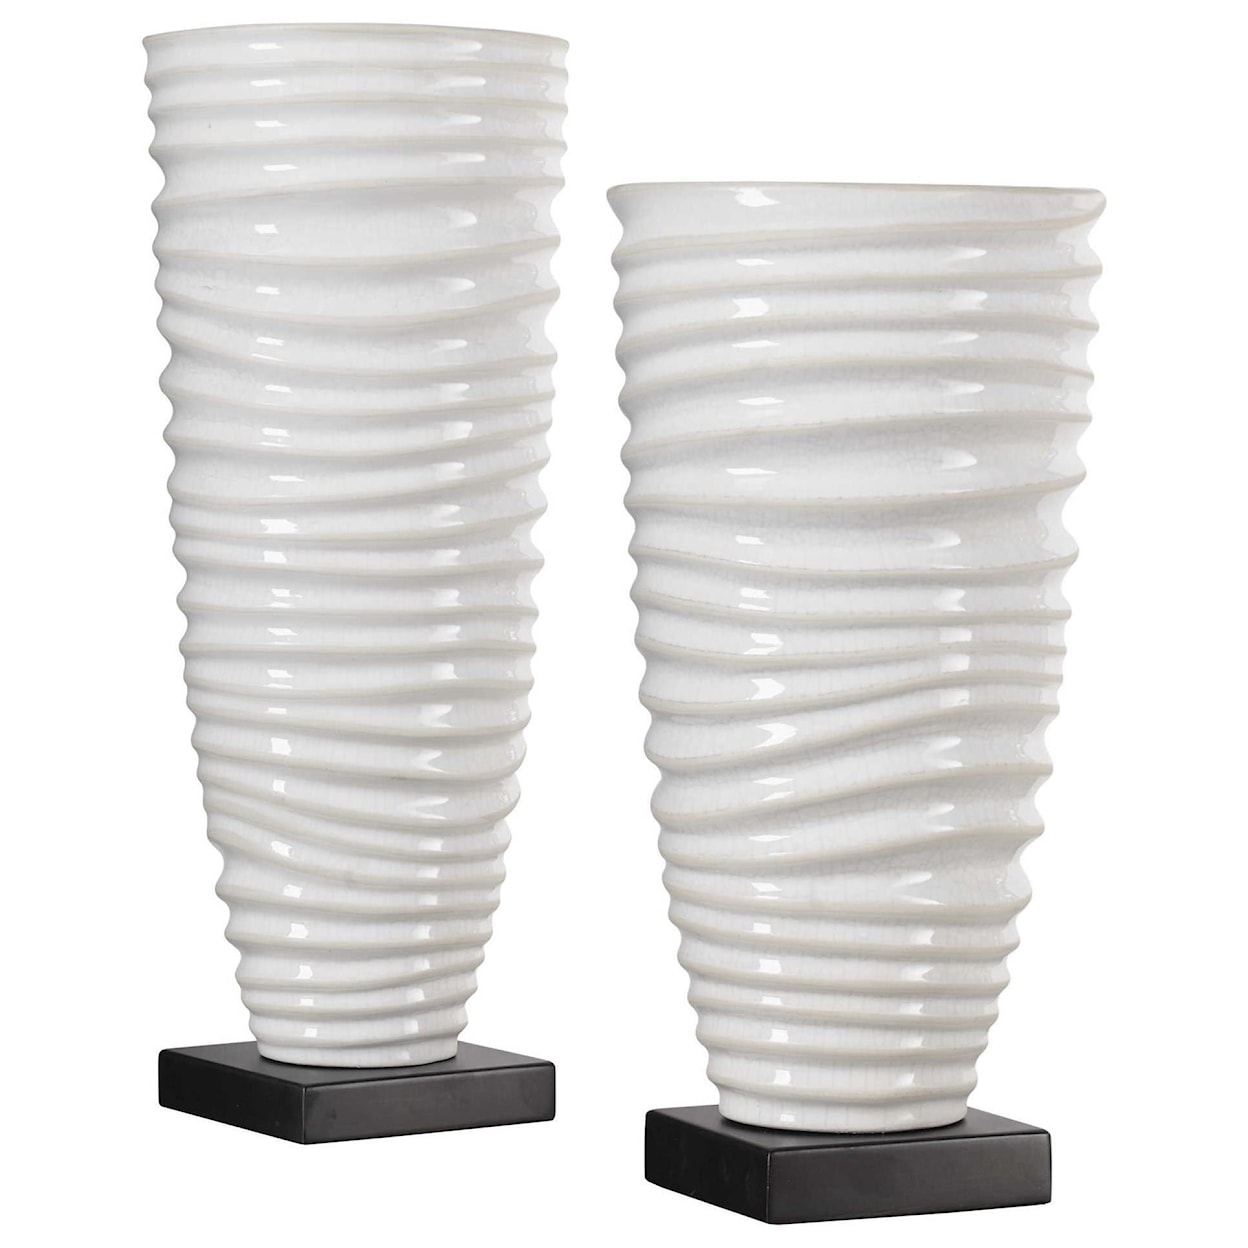 Uttermost Accessories - Vases and Urns Kiera Aged White Vases, S/2